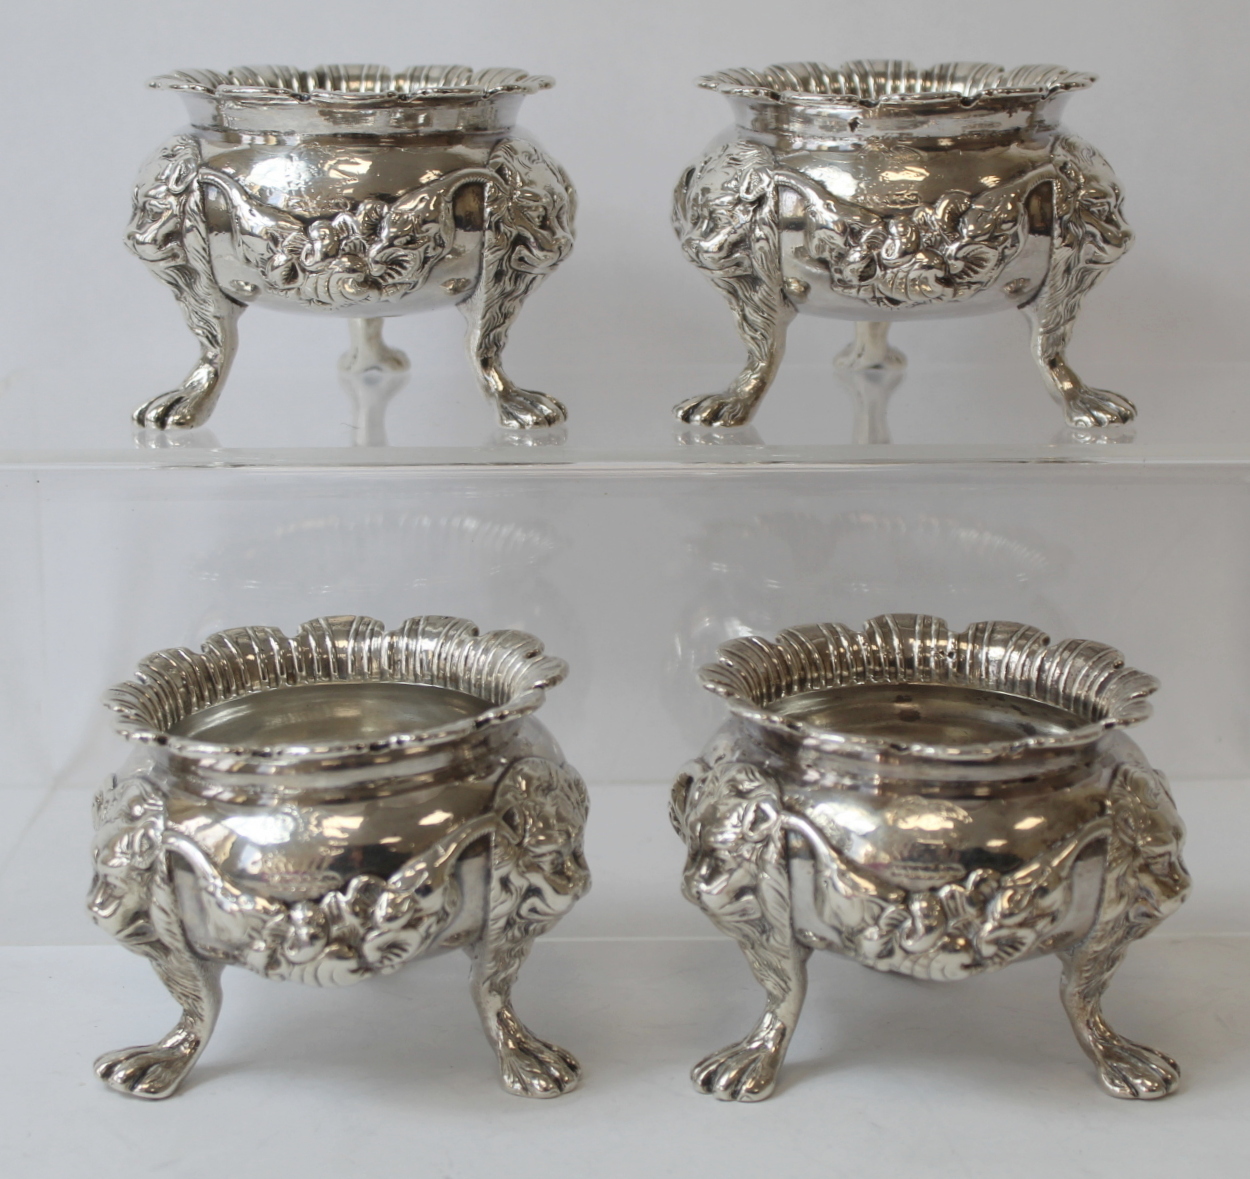 Impressive set of four cast silver salts of good gauge with cast swags and deeply gadrooned edges